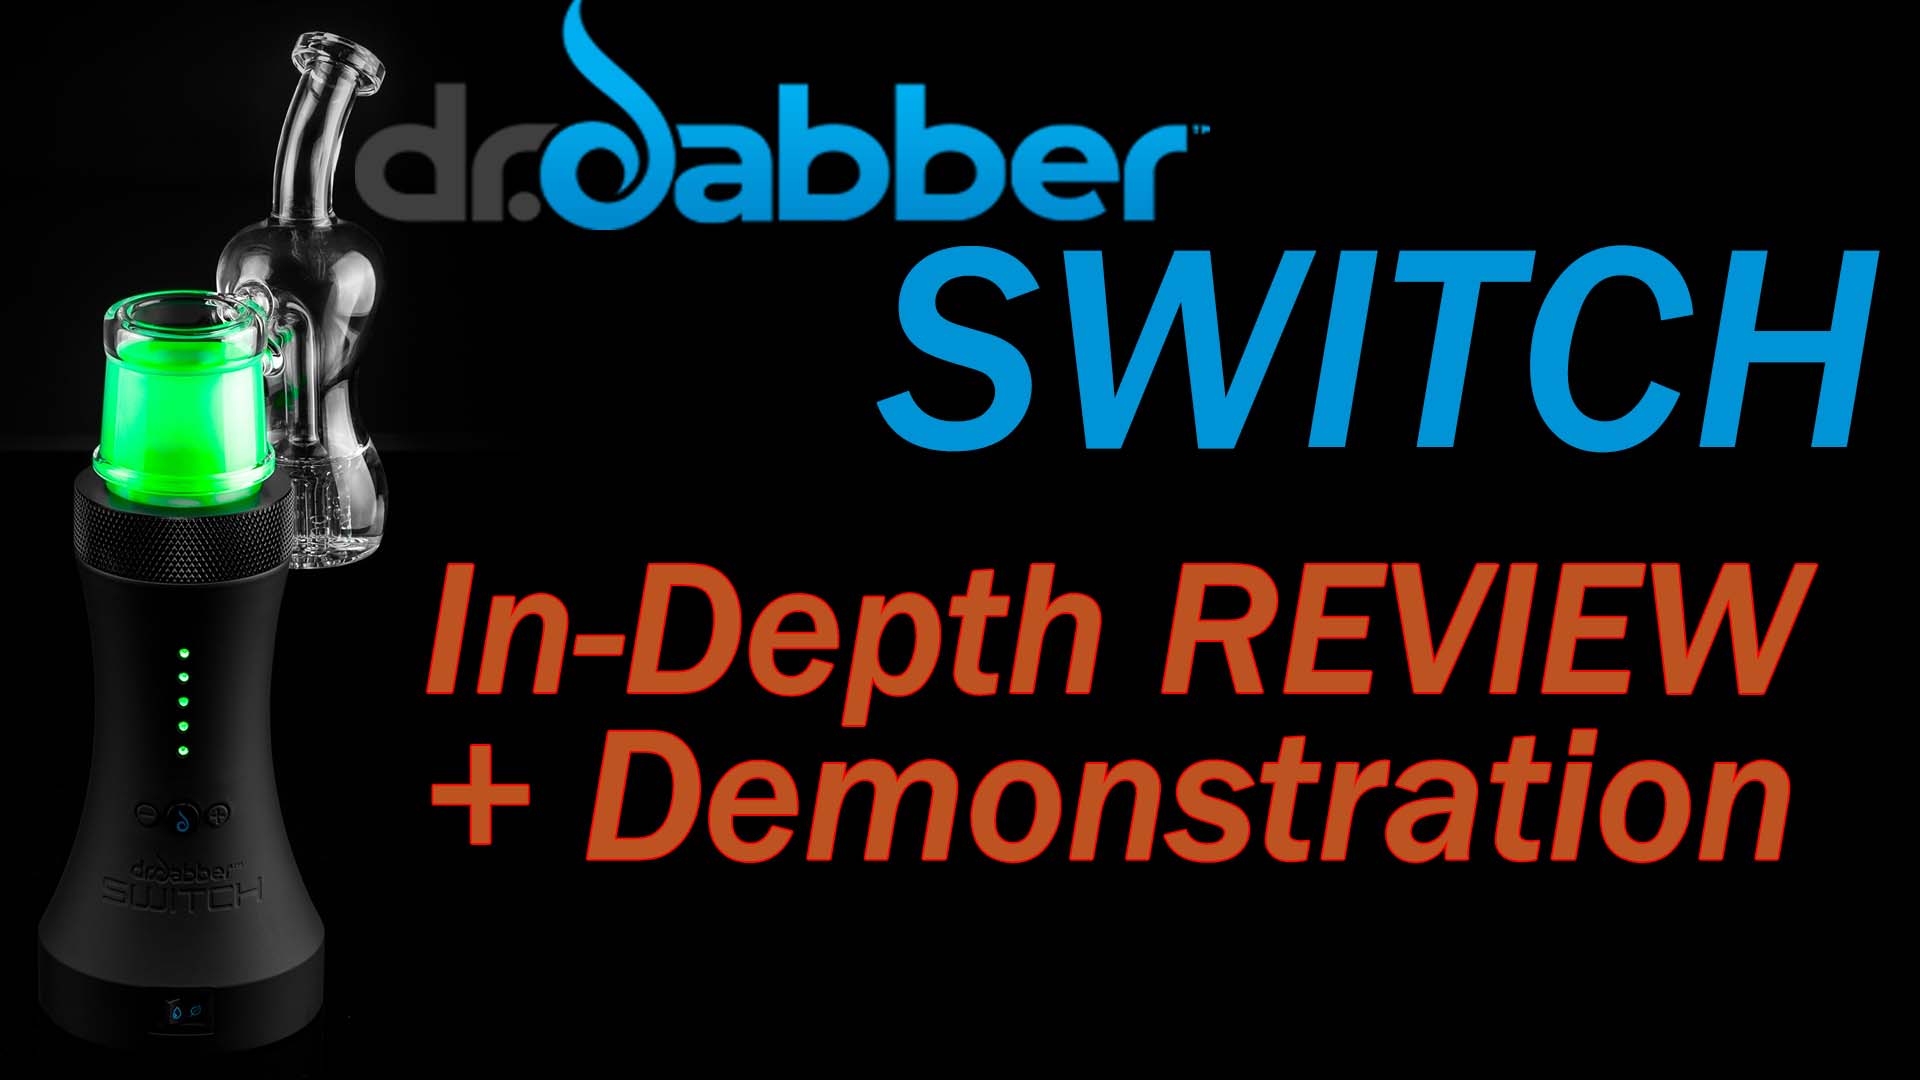 Dr. Dabber Switch Review – Portable Induction Dab Rig